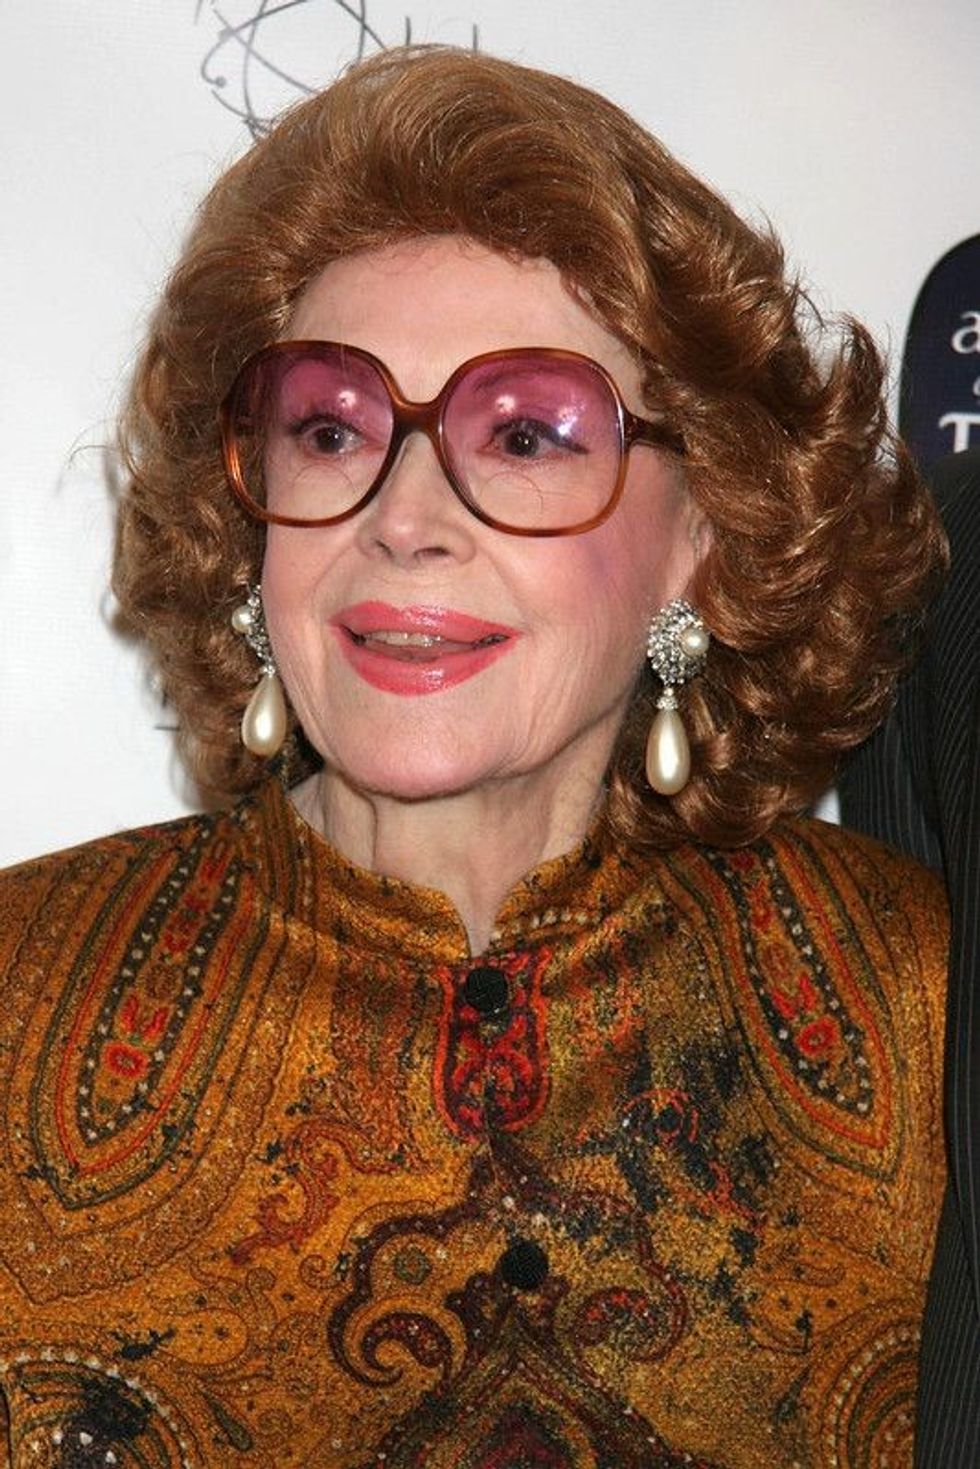 Read all about Jayne Meadows and her career here.